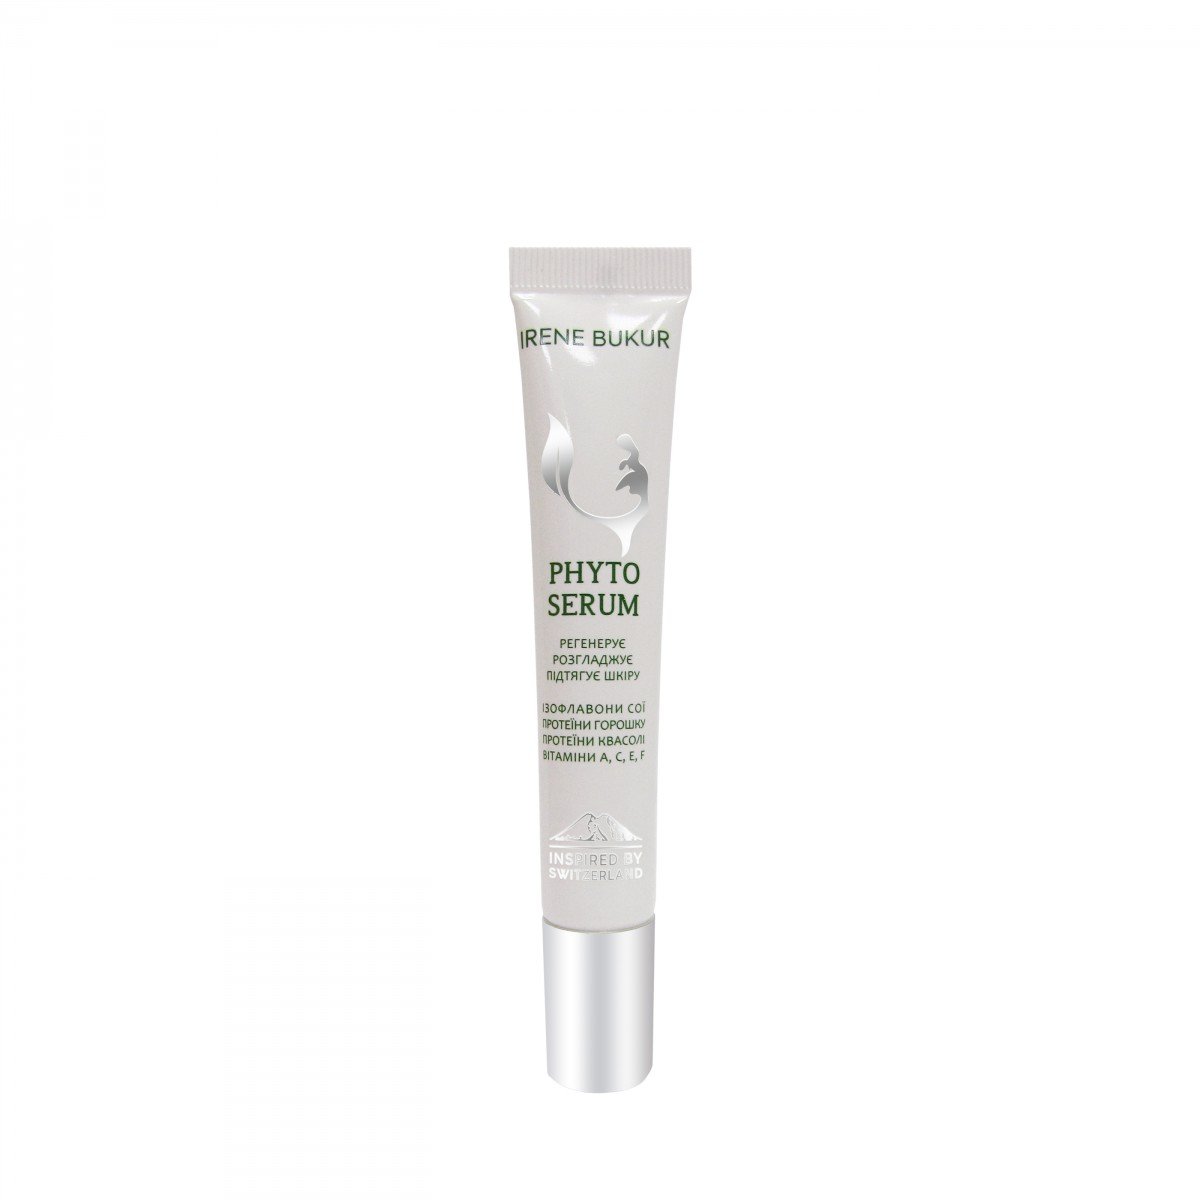  Face serum Phyto with isoflavones, 15 ml   STOCK SALE